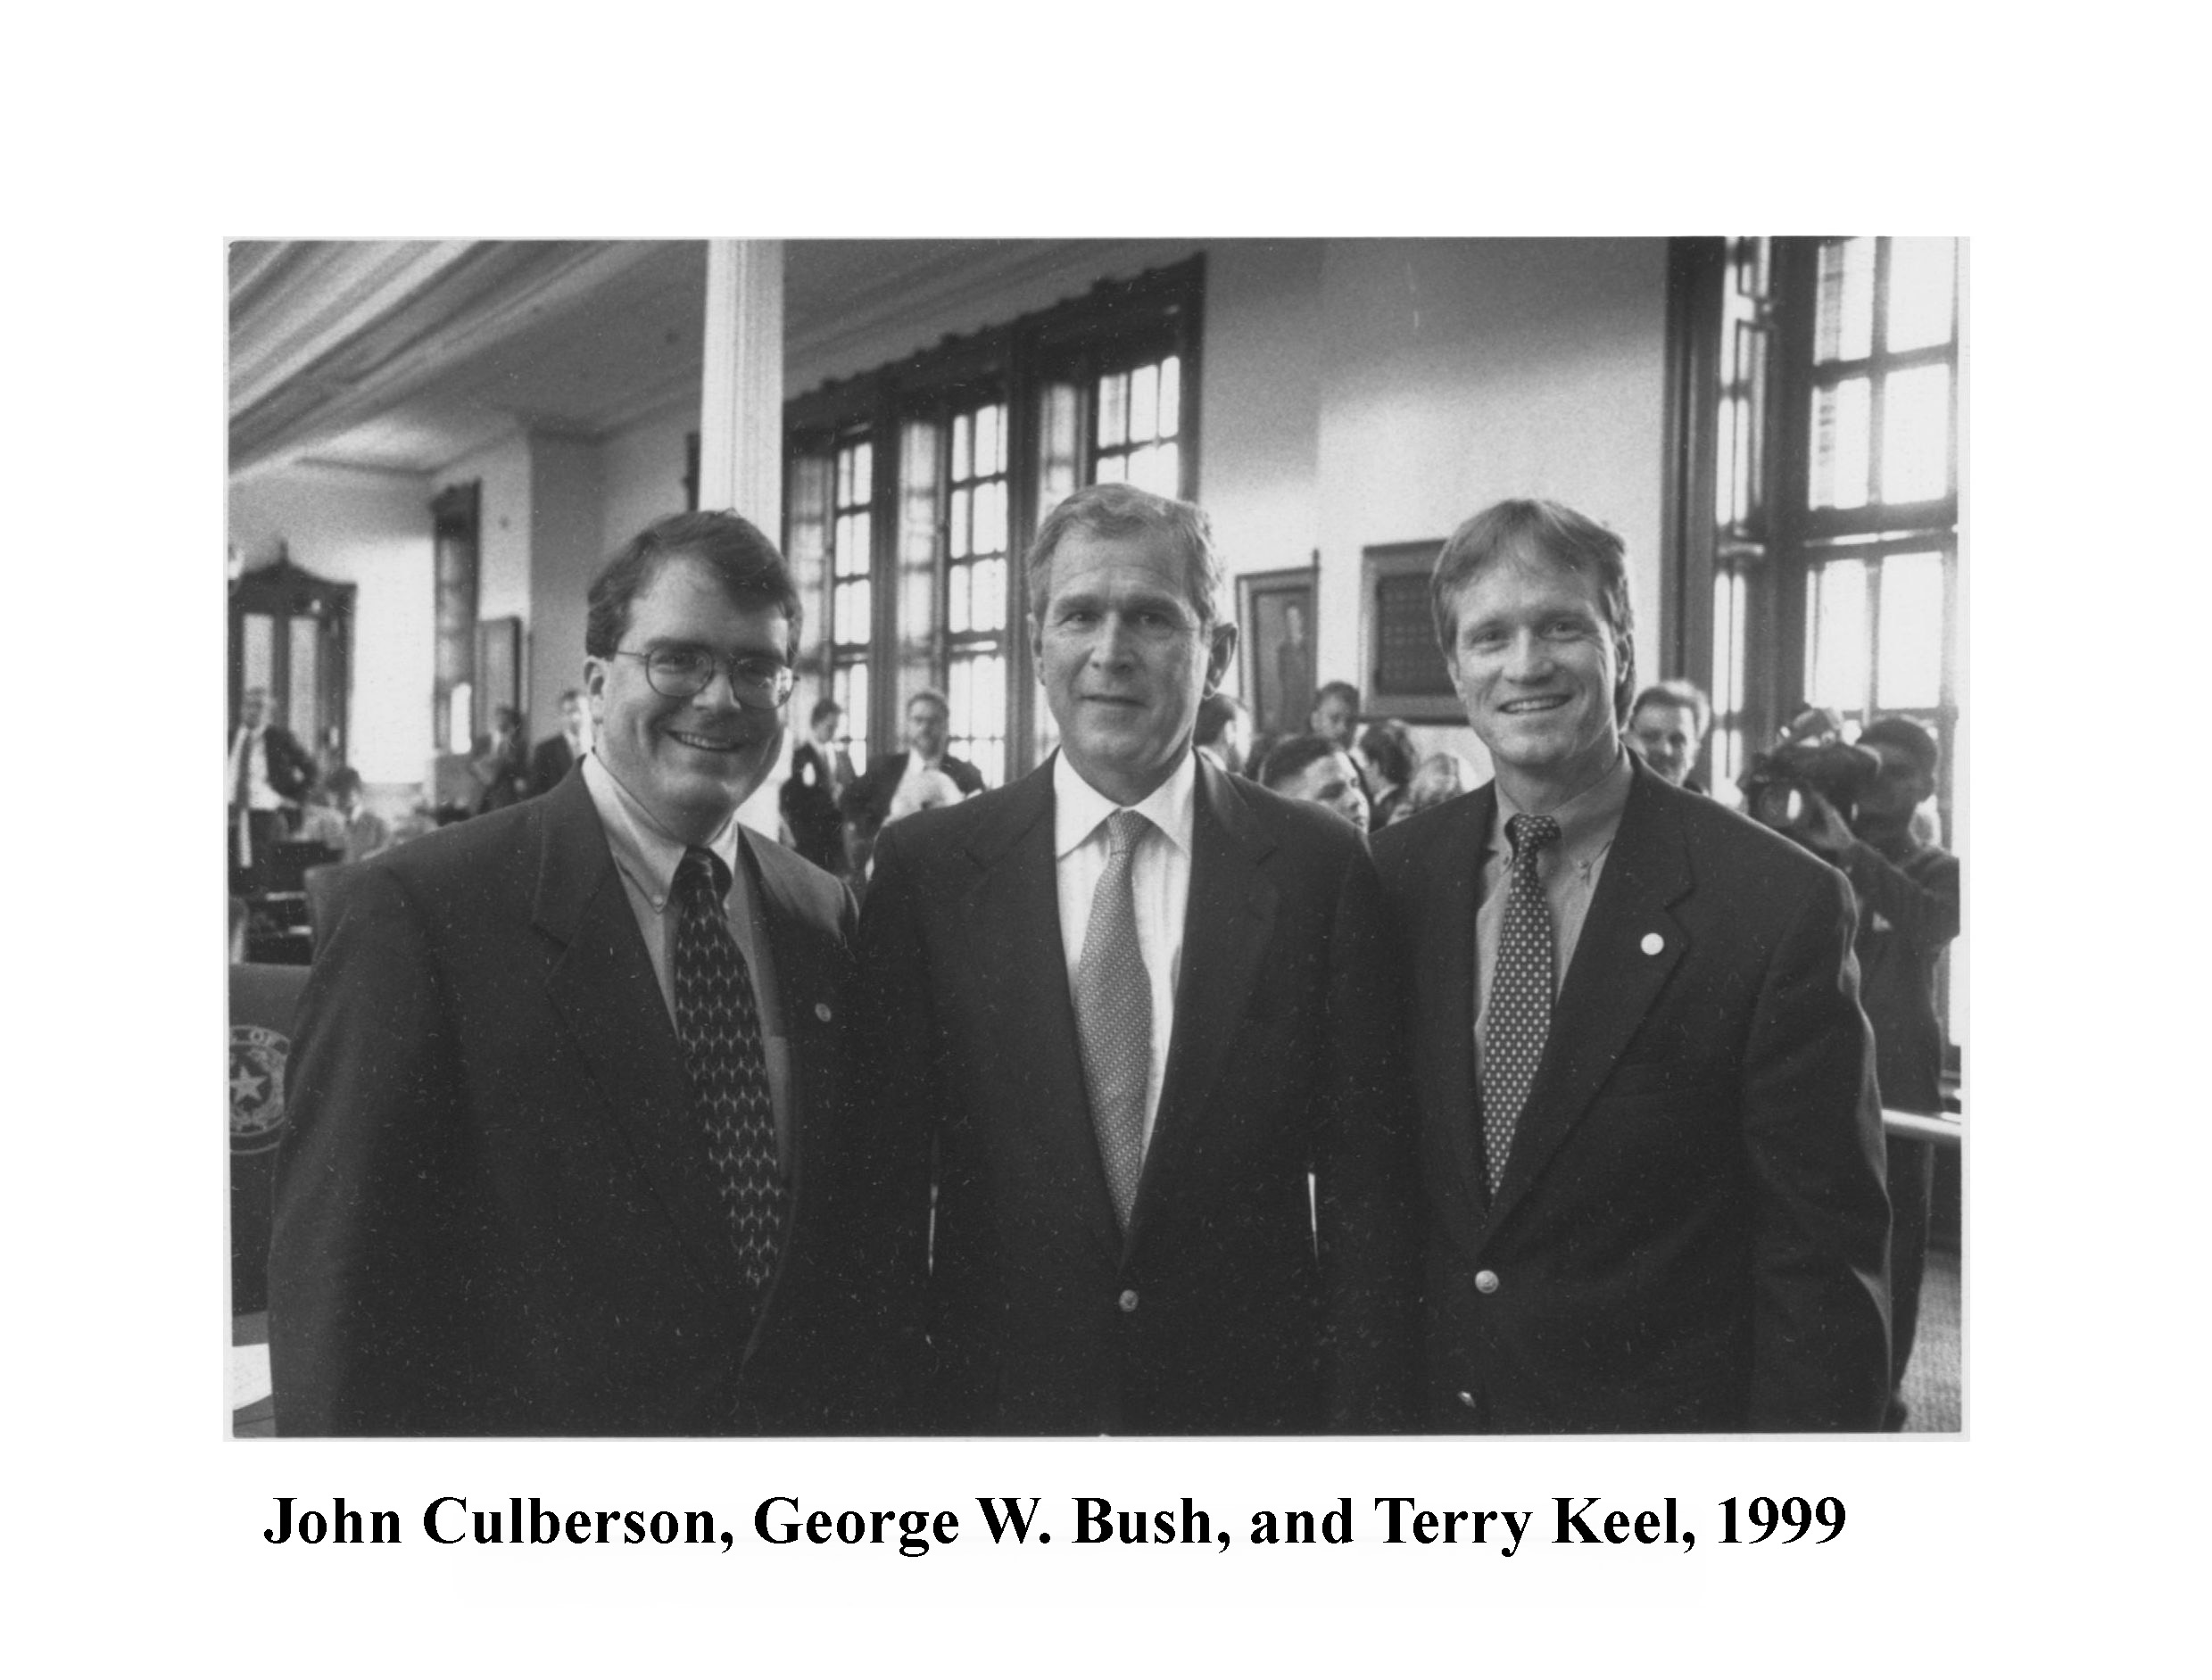 John Culberson, George W. Bush, and Terry Keel. 1999. Photo courtesy of Terry Keel